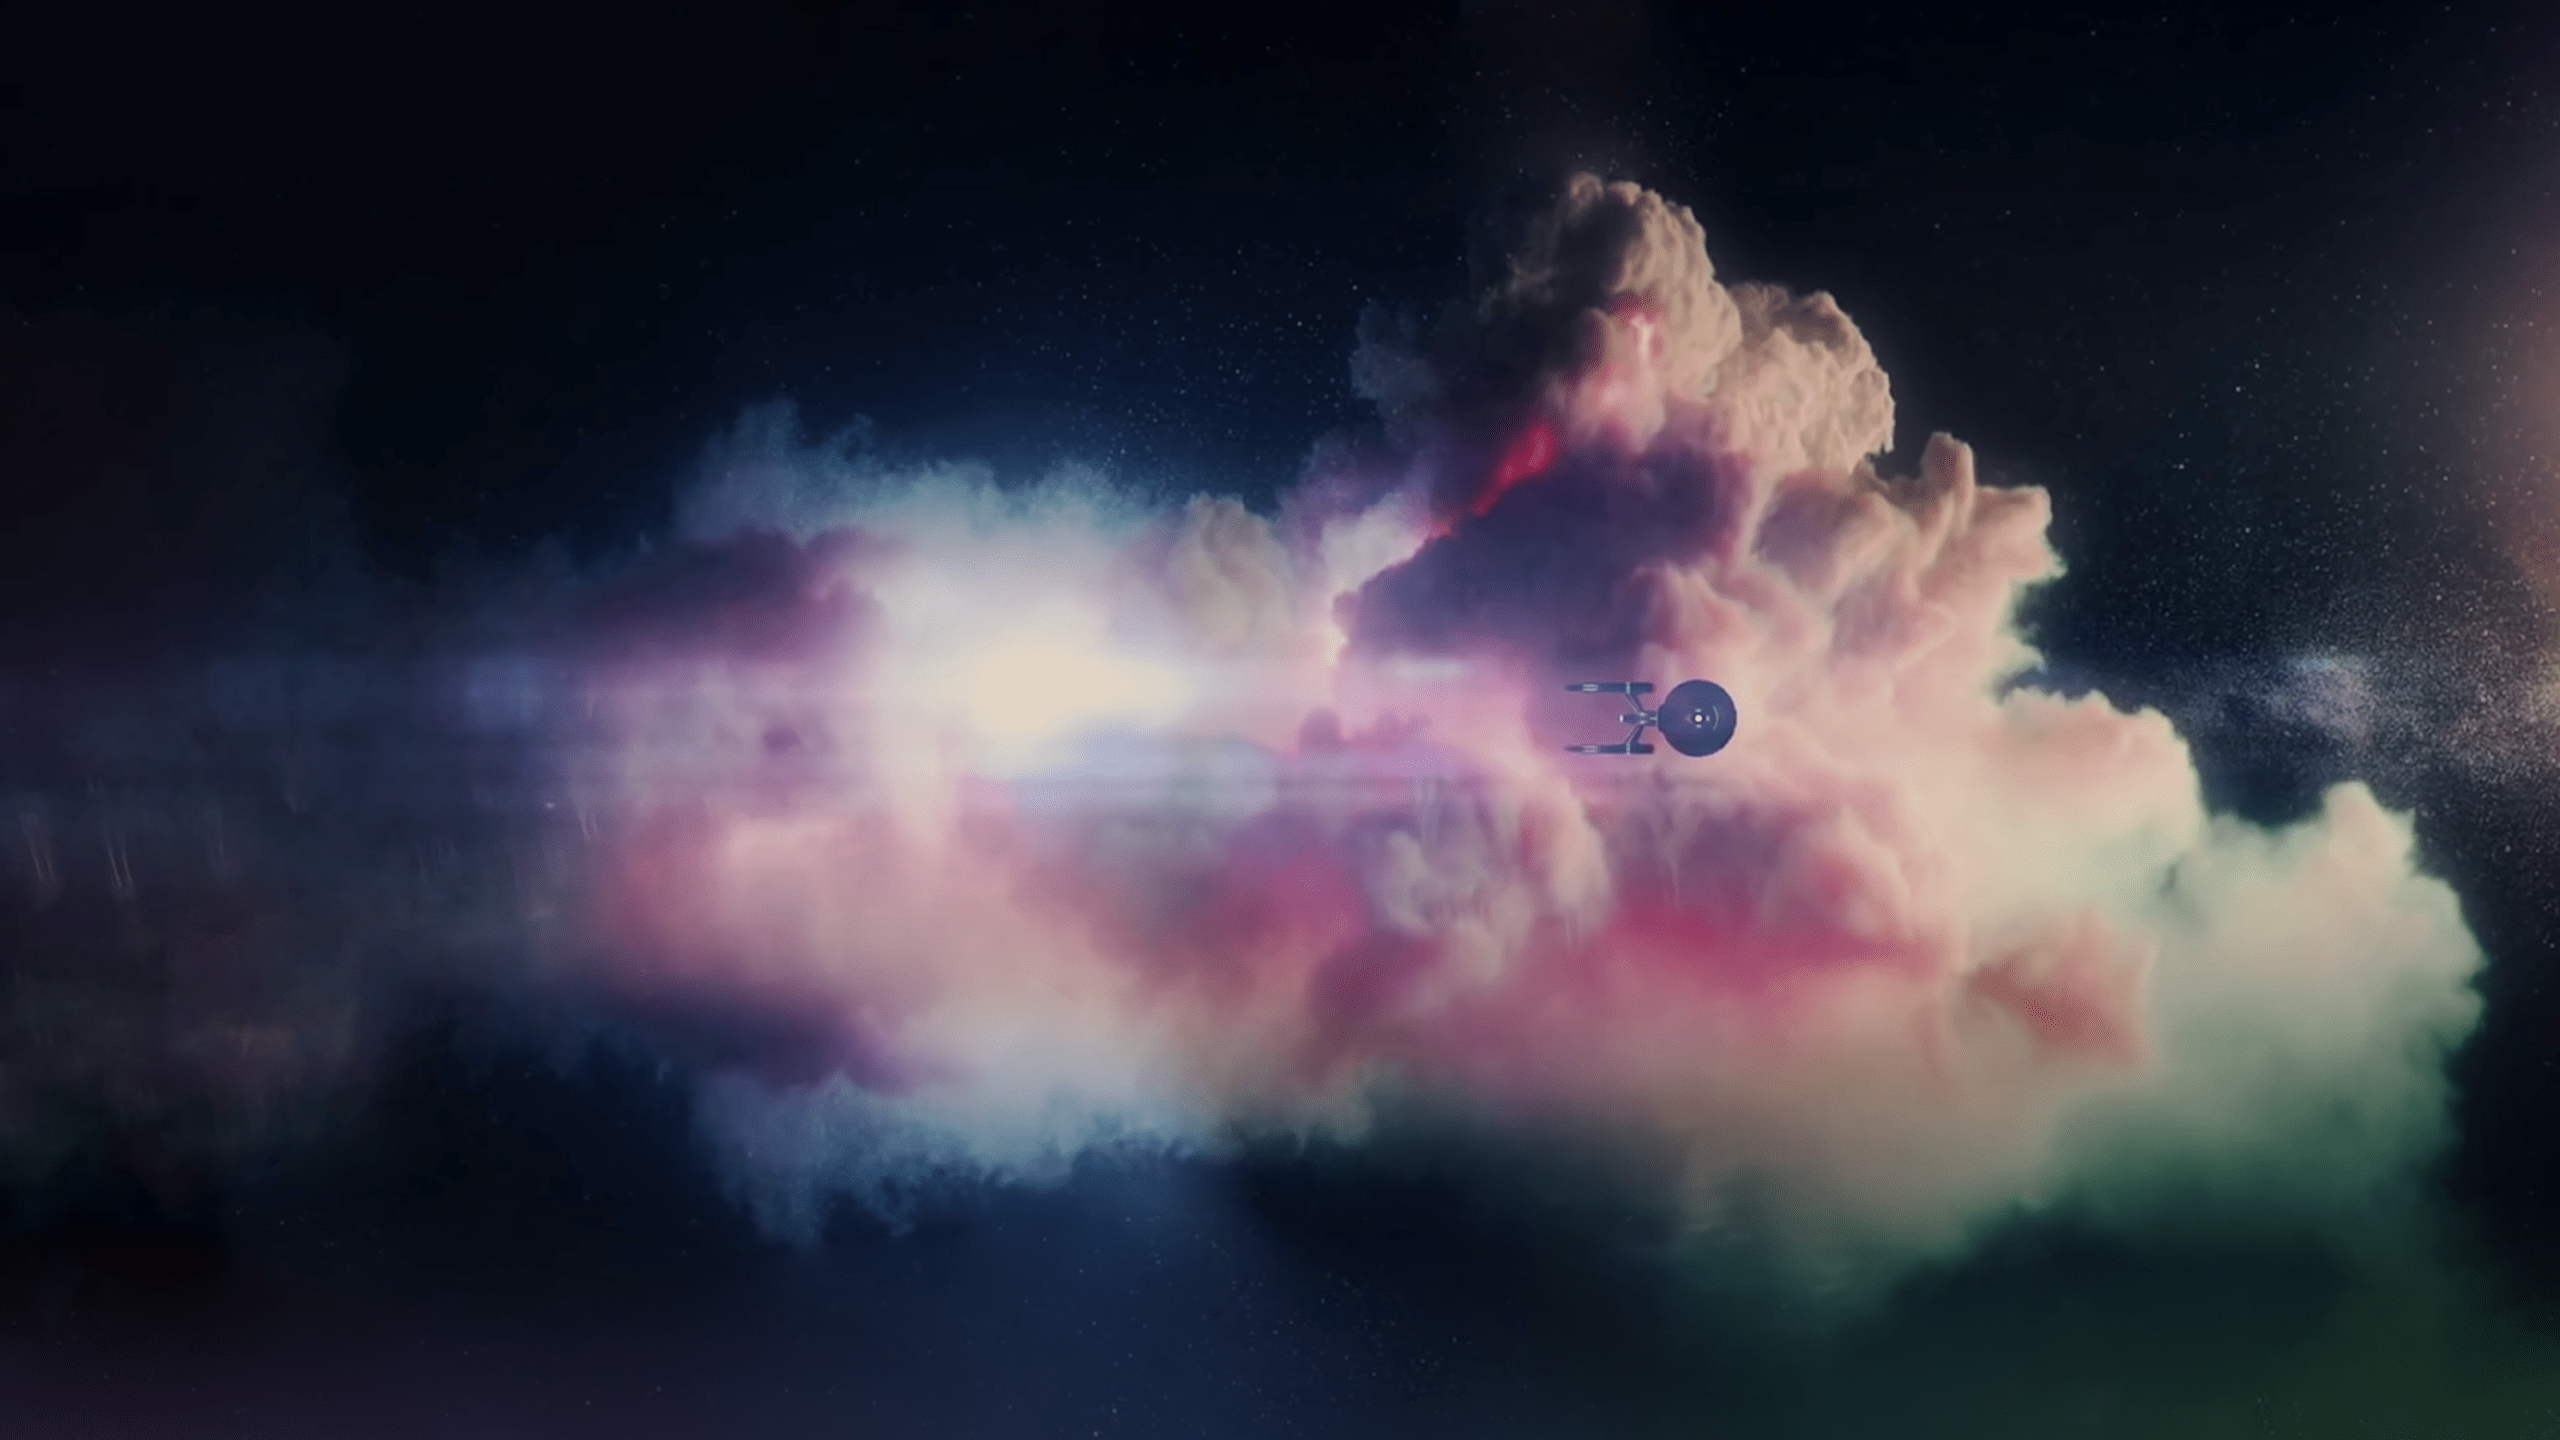 Took some stills from the Strange New Worlds intro and made them into wallpaper. - Star Trek